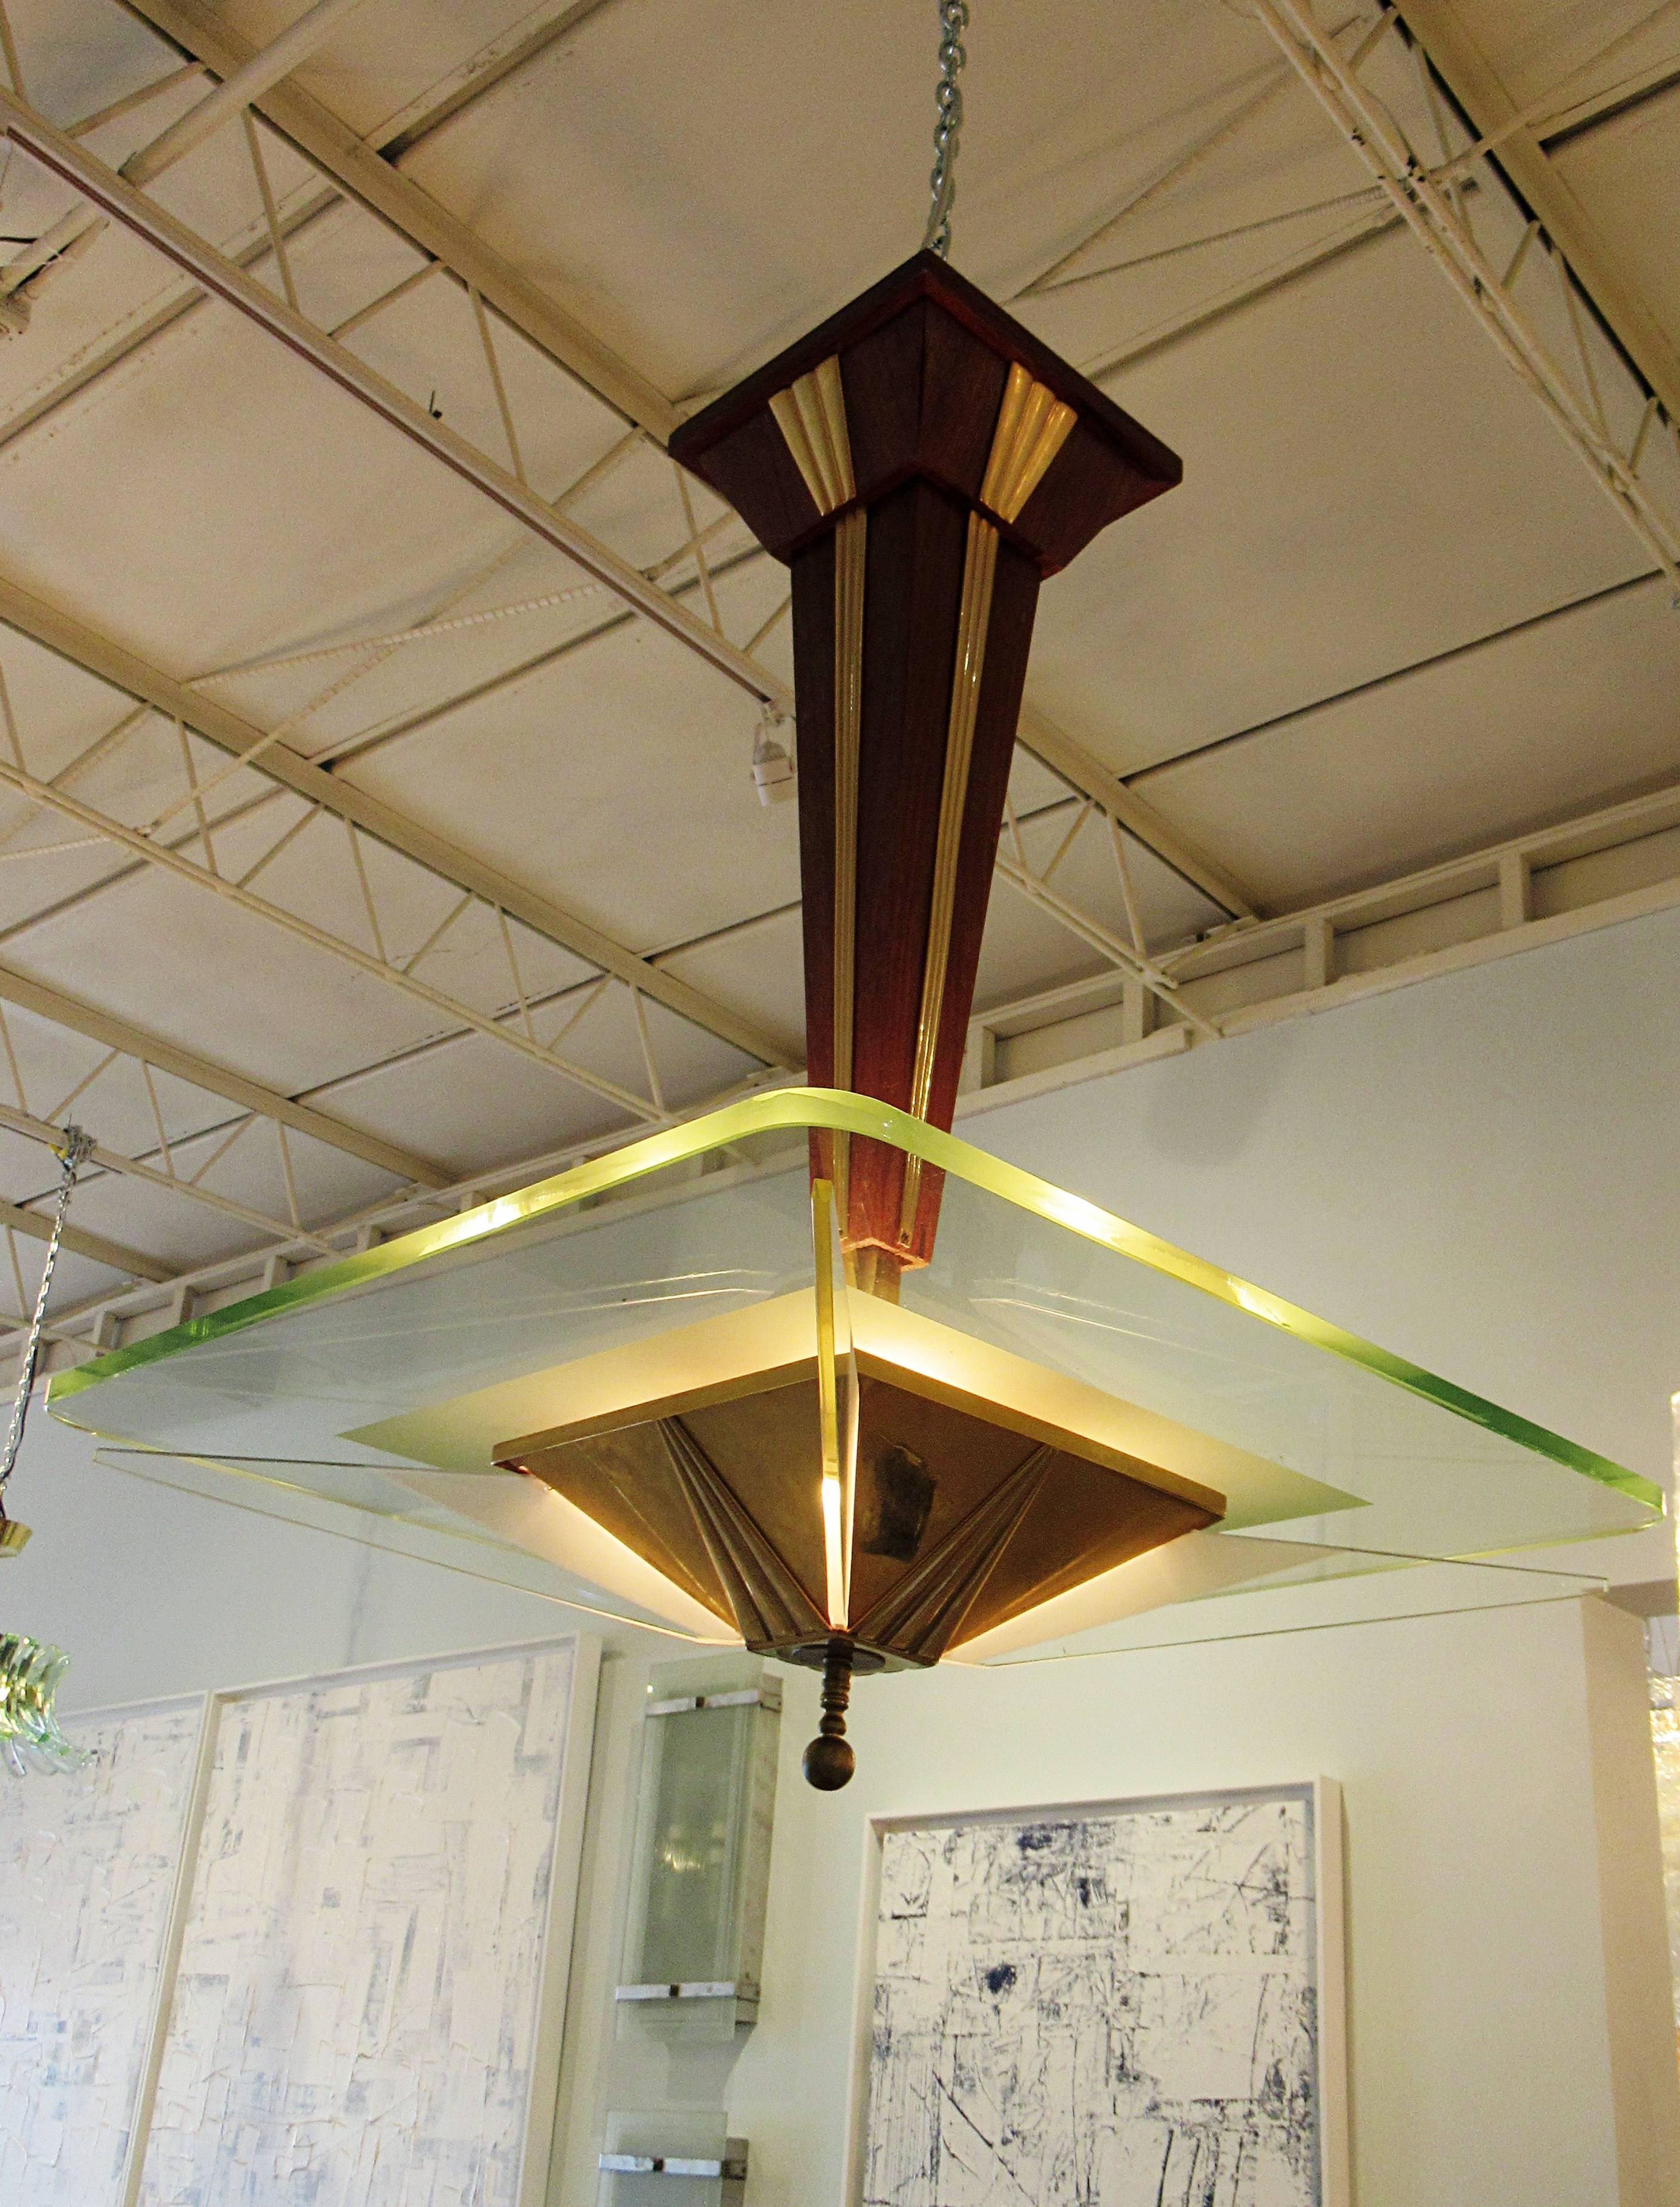 Brass inlaid walnut central tapering support with polished brass accents meeting a square glass slab light source, with each corner having fin shaped glass cut-glass, meeting a pyramidal brass and walnut central light source
Literature: Fontana